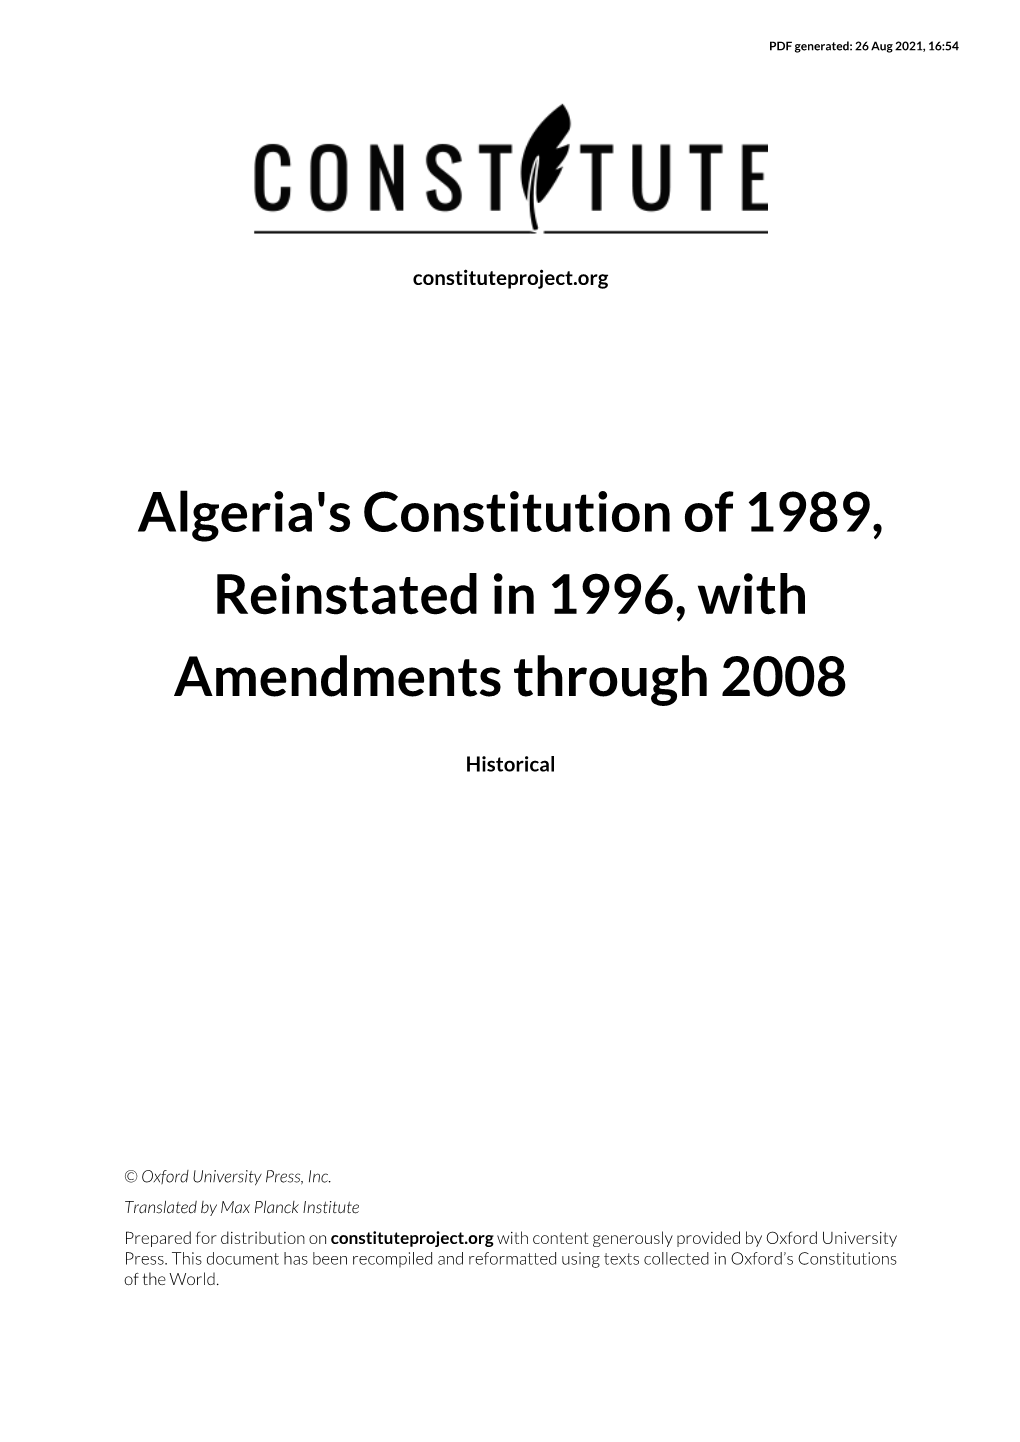 Algeria's Constitution of 1989, Reinstated in 1996, with Amendments Through 2008